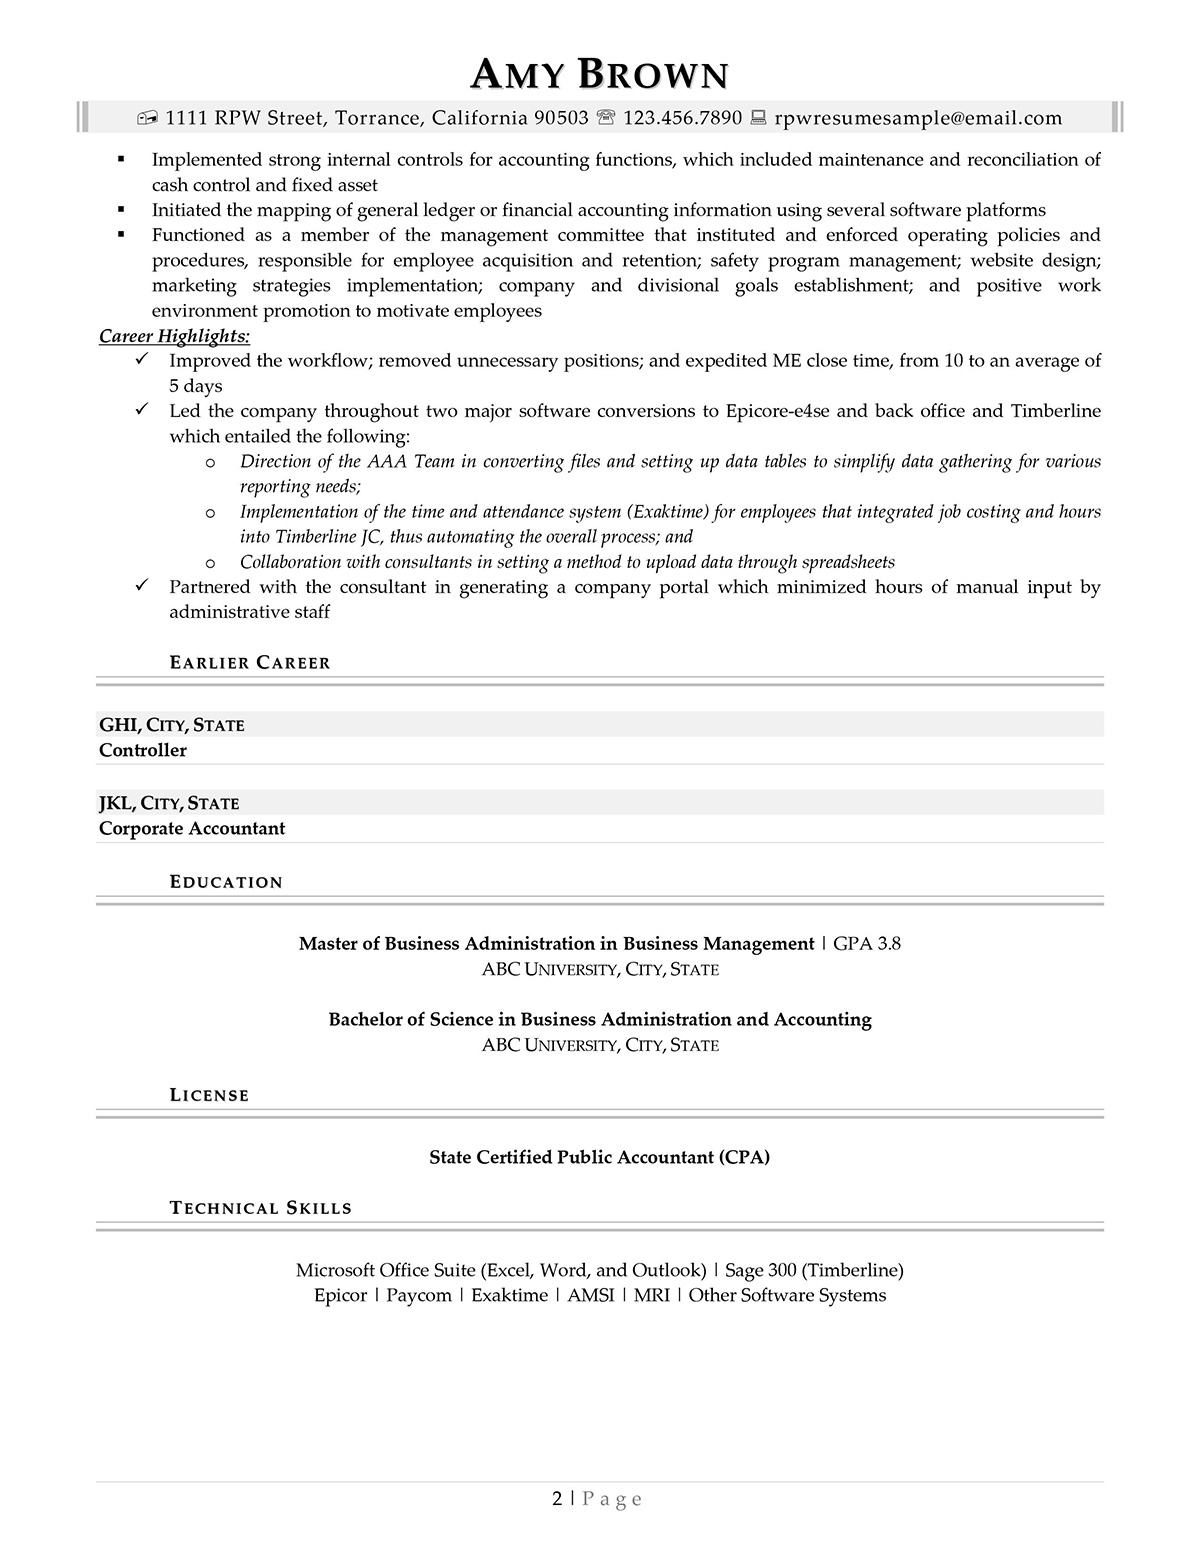 Resume Professional Writers Executive Resume Examples Page 2